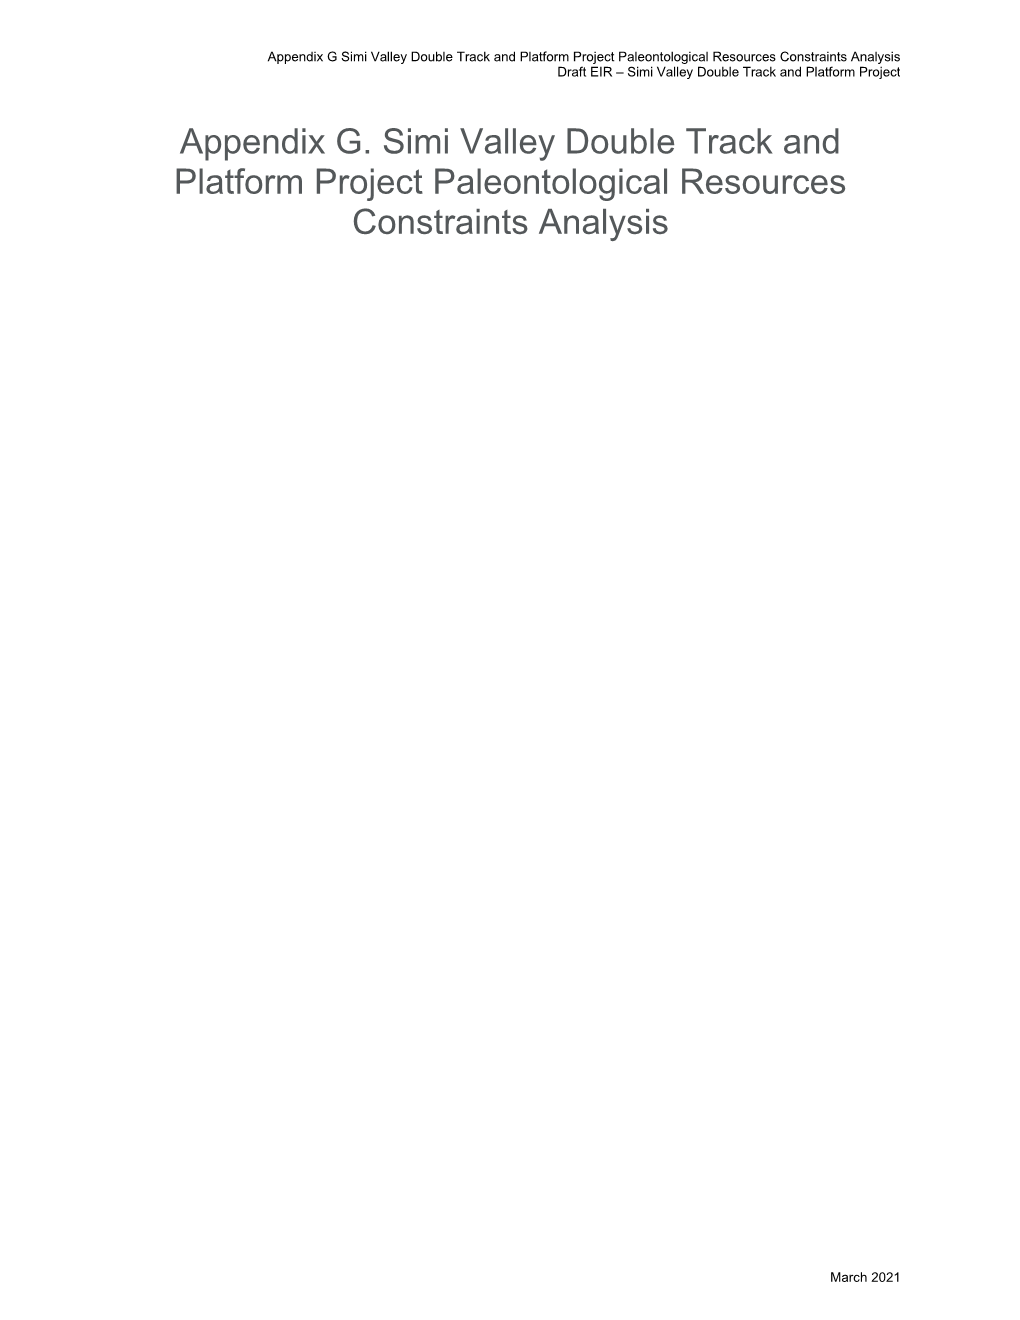 Appendix G. Simi Valley Double Track and Platform Project Paleontological Resources Constraints Analysis